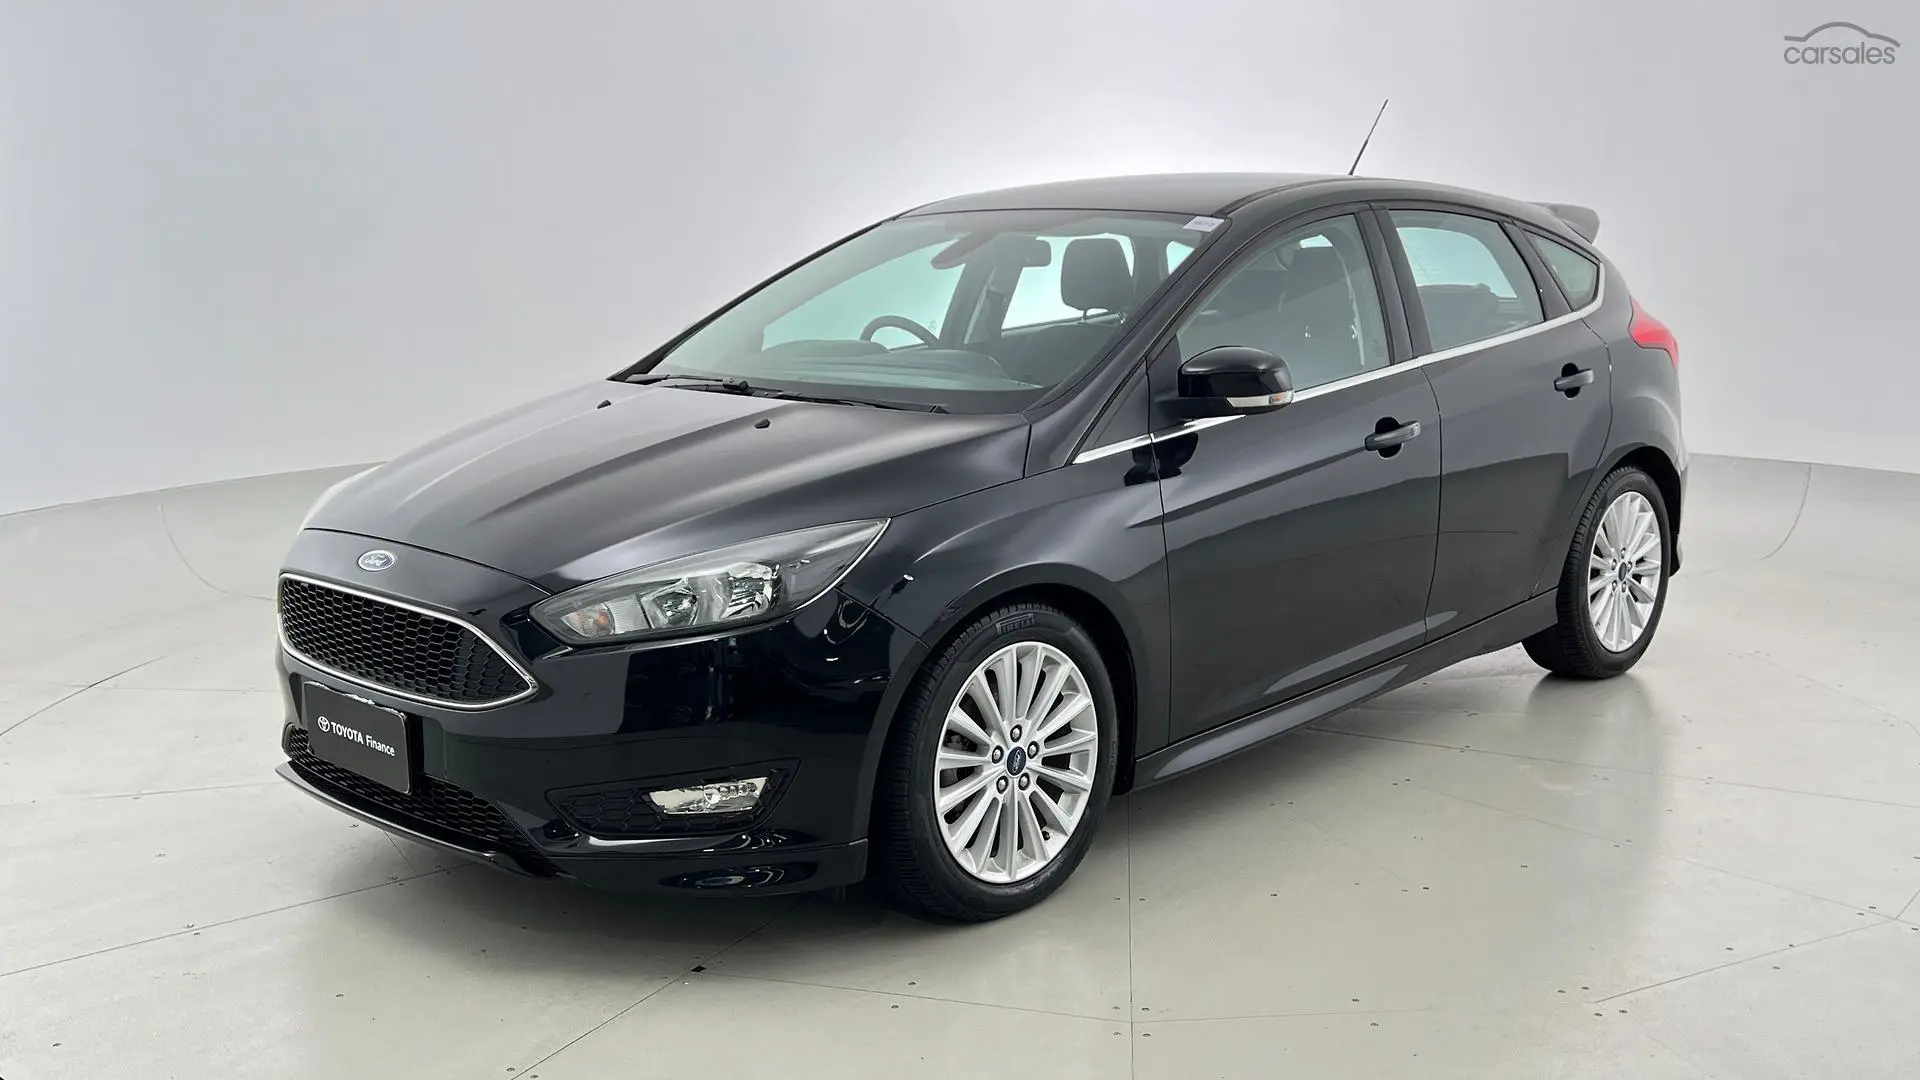 2015 Ford Focus Image 8